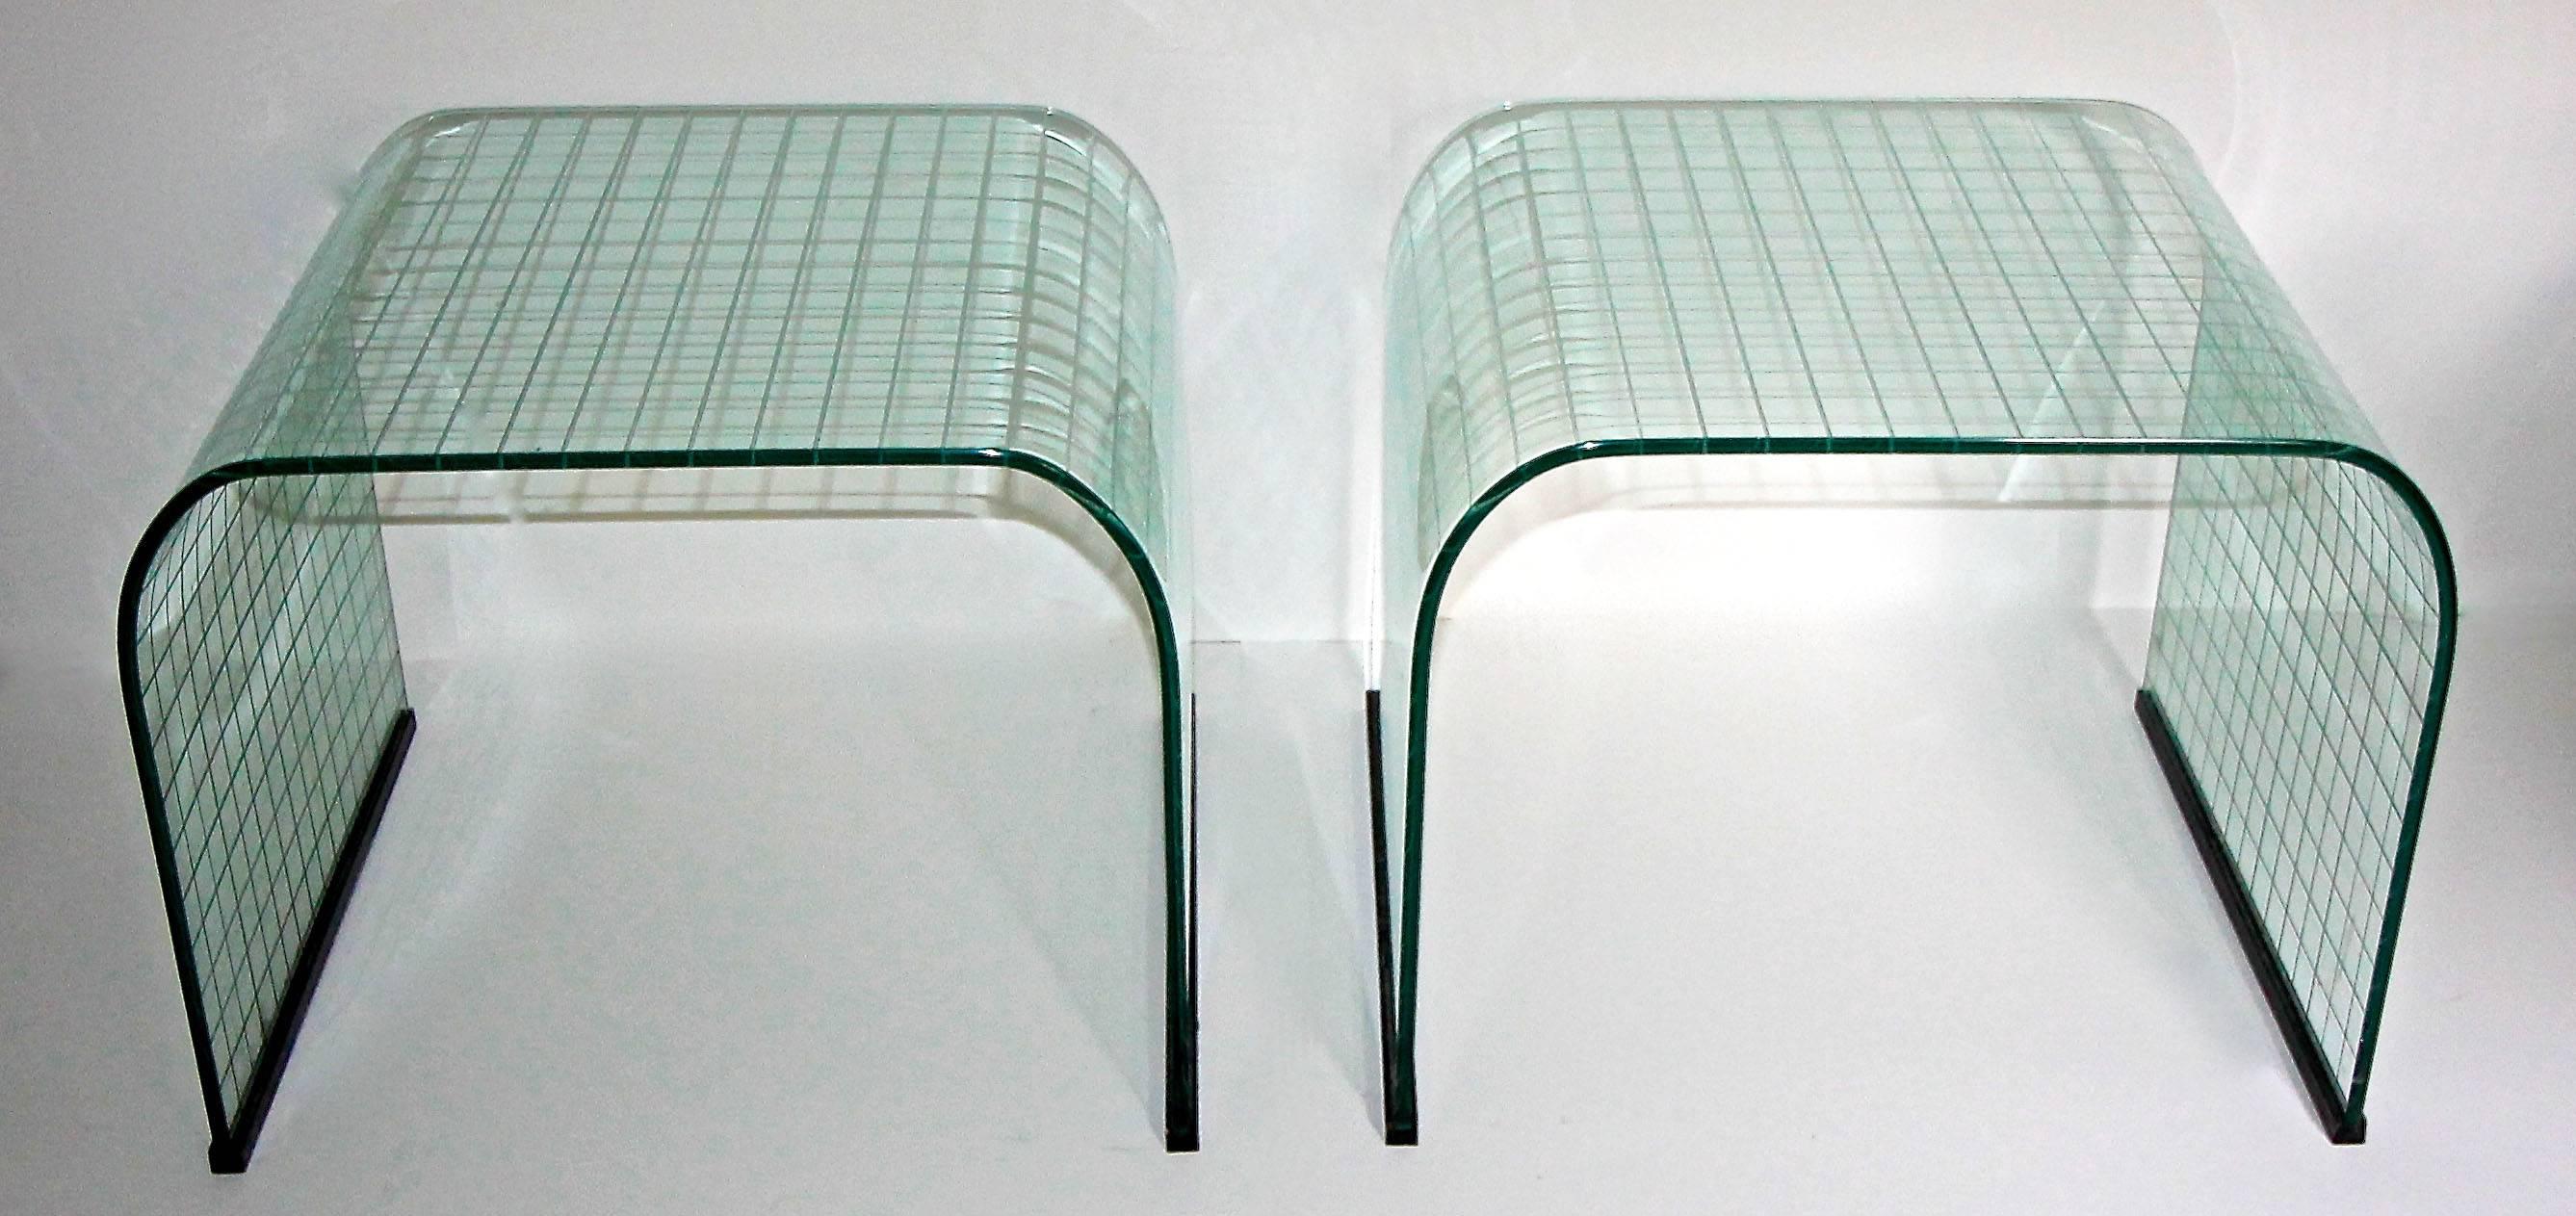 A beautiful pair of early production tempered glass side or end tables in a fluid 